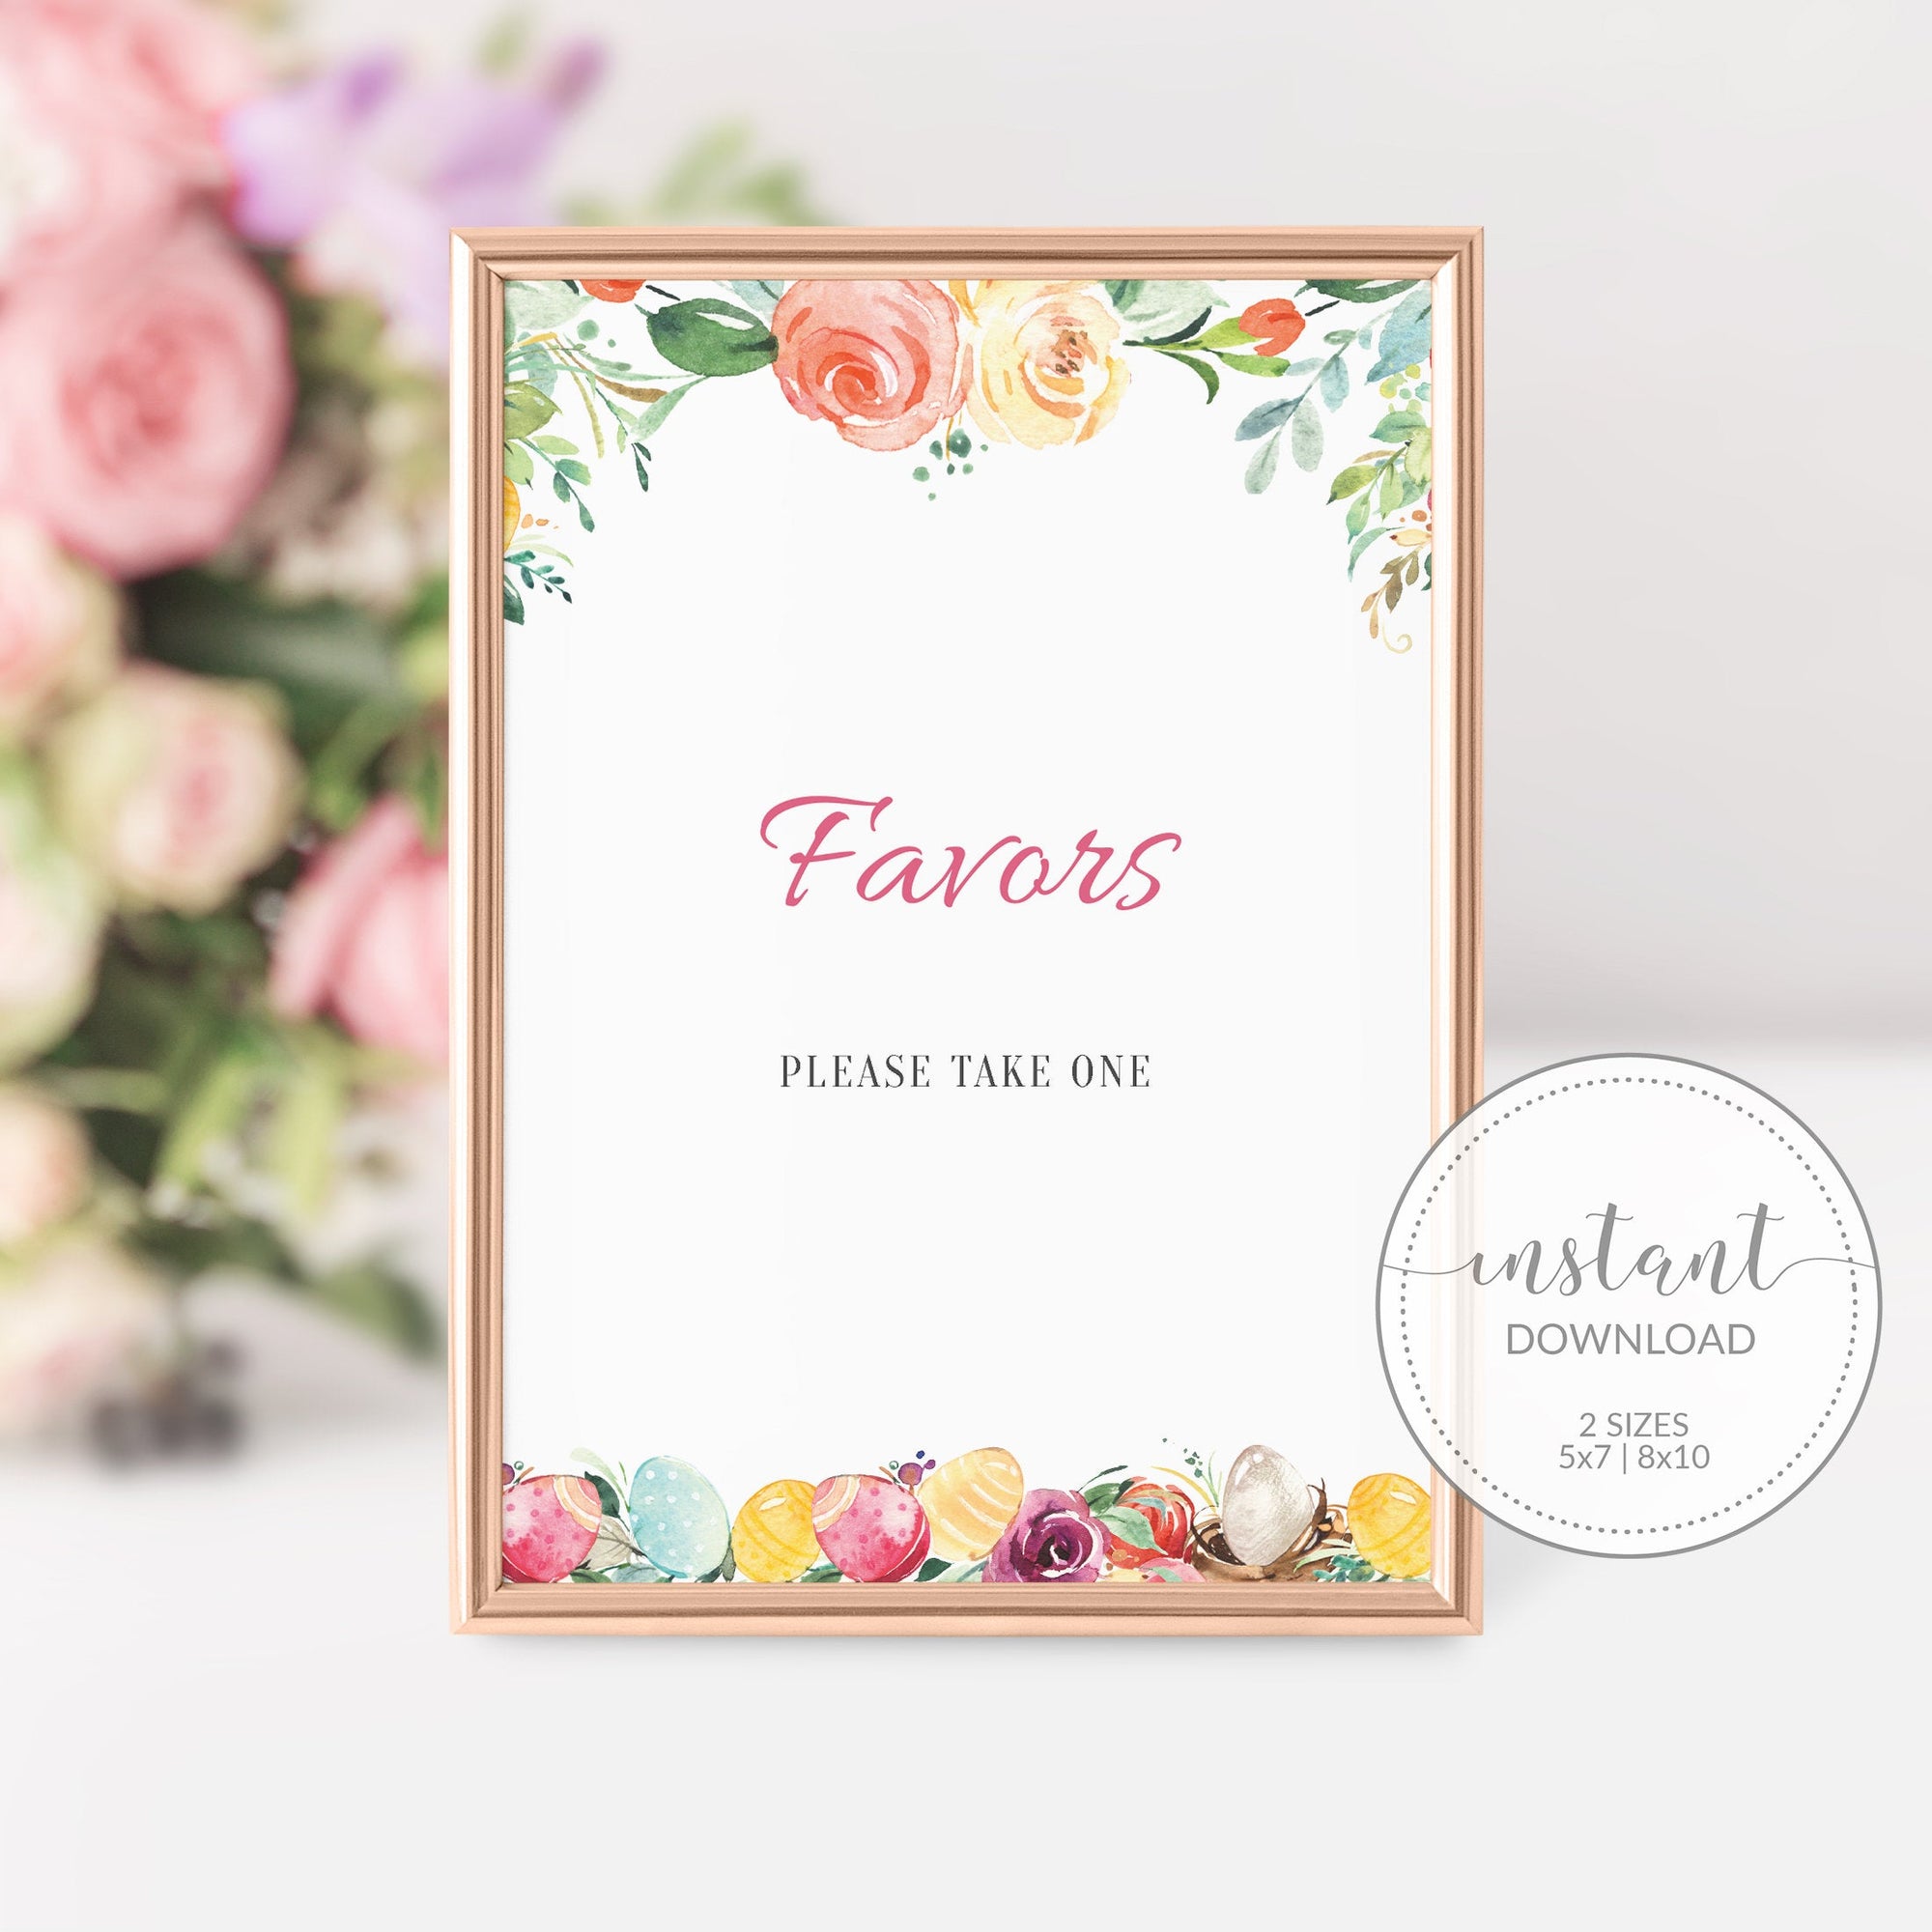 Easter Favors Sign Printable, Easter Sign, Printable Easter Decorations, Easter Party Supplies, Easter Decor, DIGITAL DOWNLOAD B100